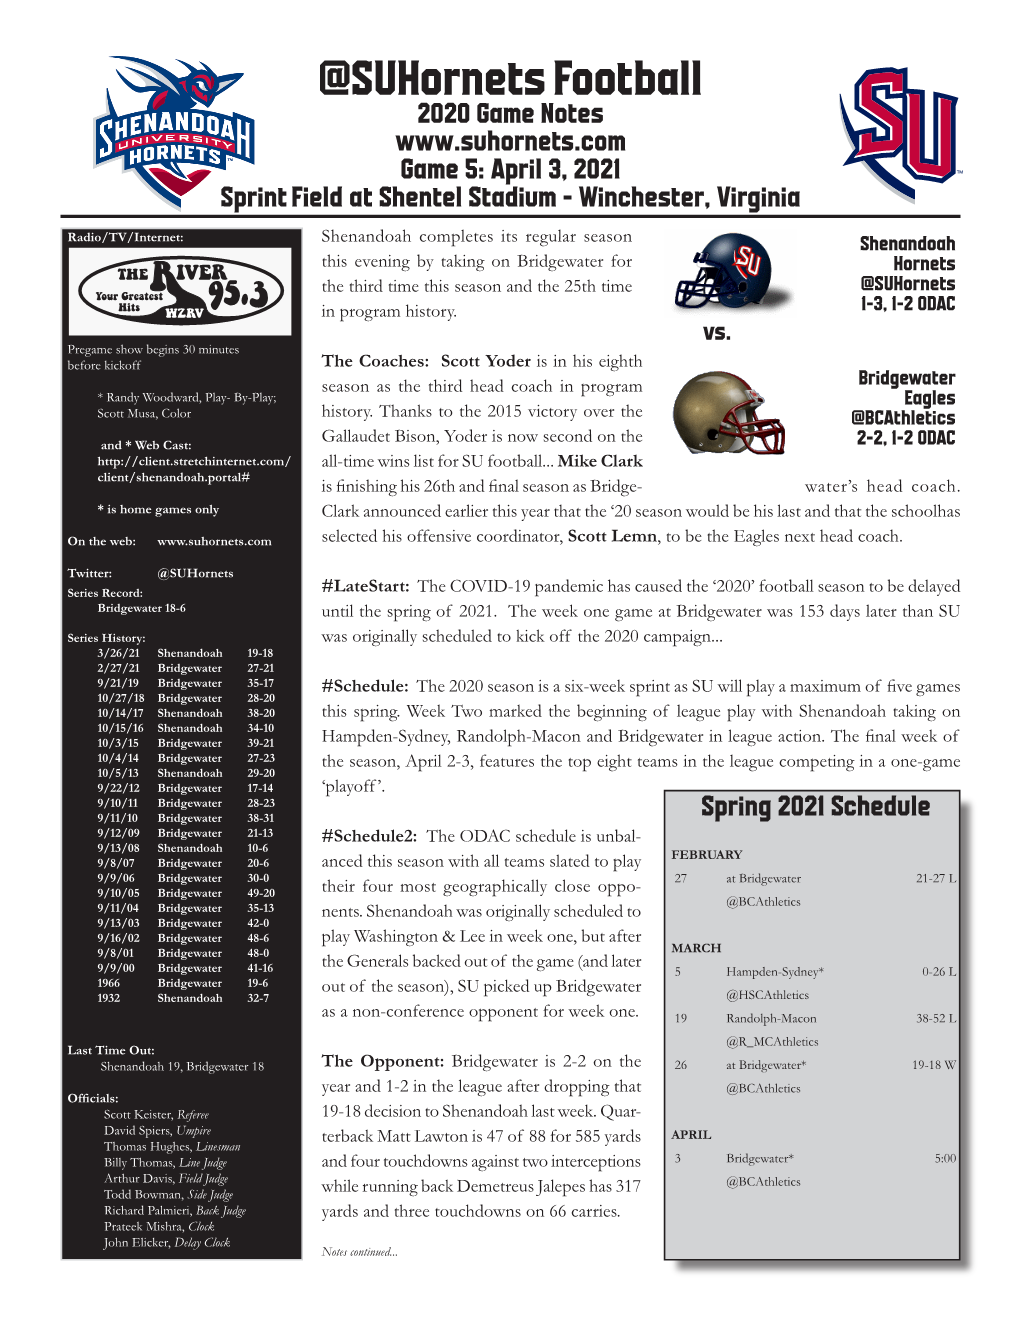 @Suhornets Football 2020 Game Notes Game 5: April 3, 2021 Sprint Field at Shentel Stadium - Winchester, Virginia